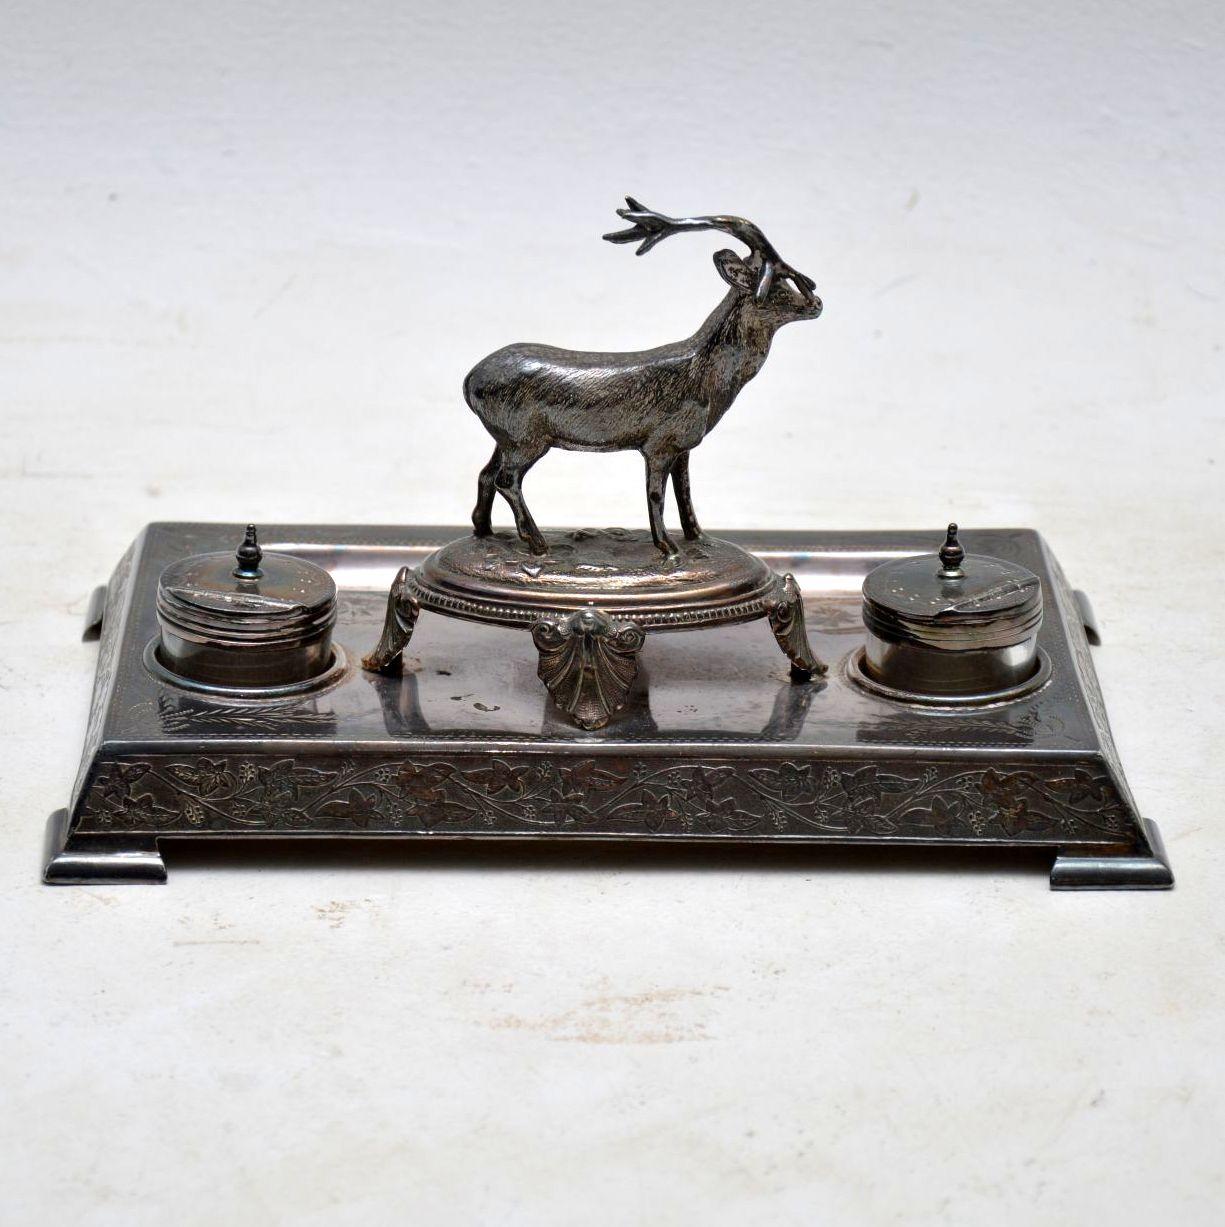 Antique Victorian silver plated inkwell stand with a well defined stag in the centre. It was made by James Deakin & his name is impressed on the underside. The silver plate is very tarnished and needs a good silver polish. Both the glass inkwell are